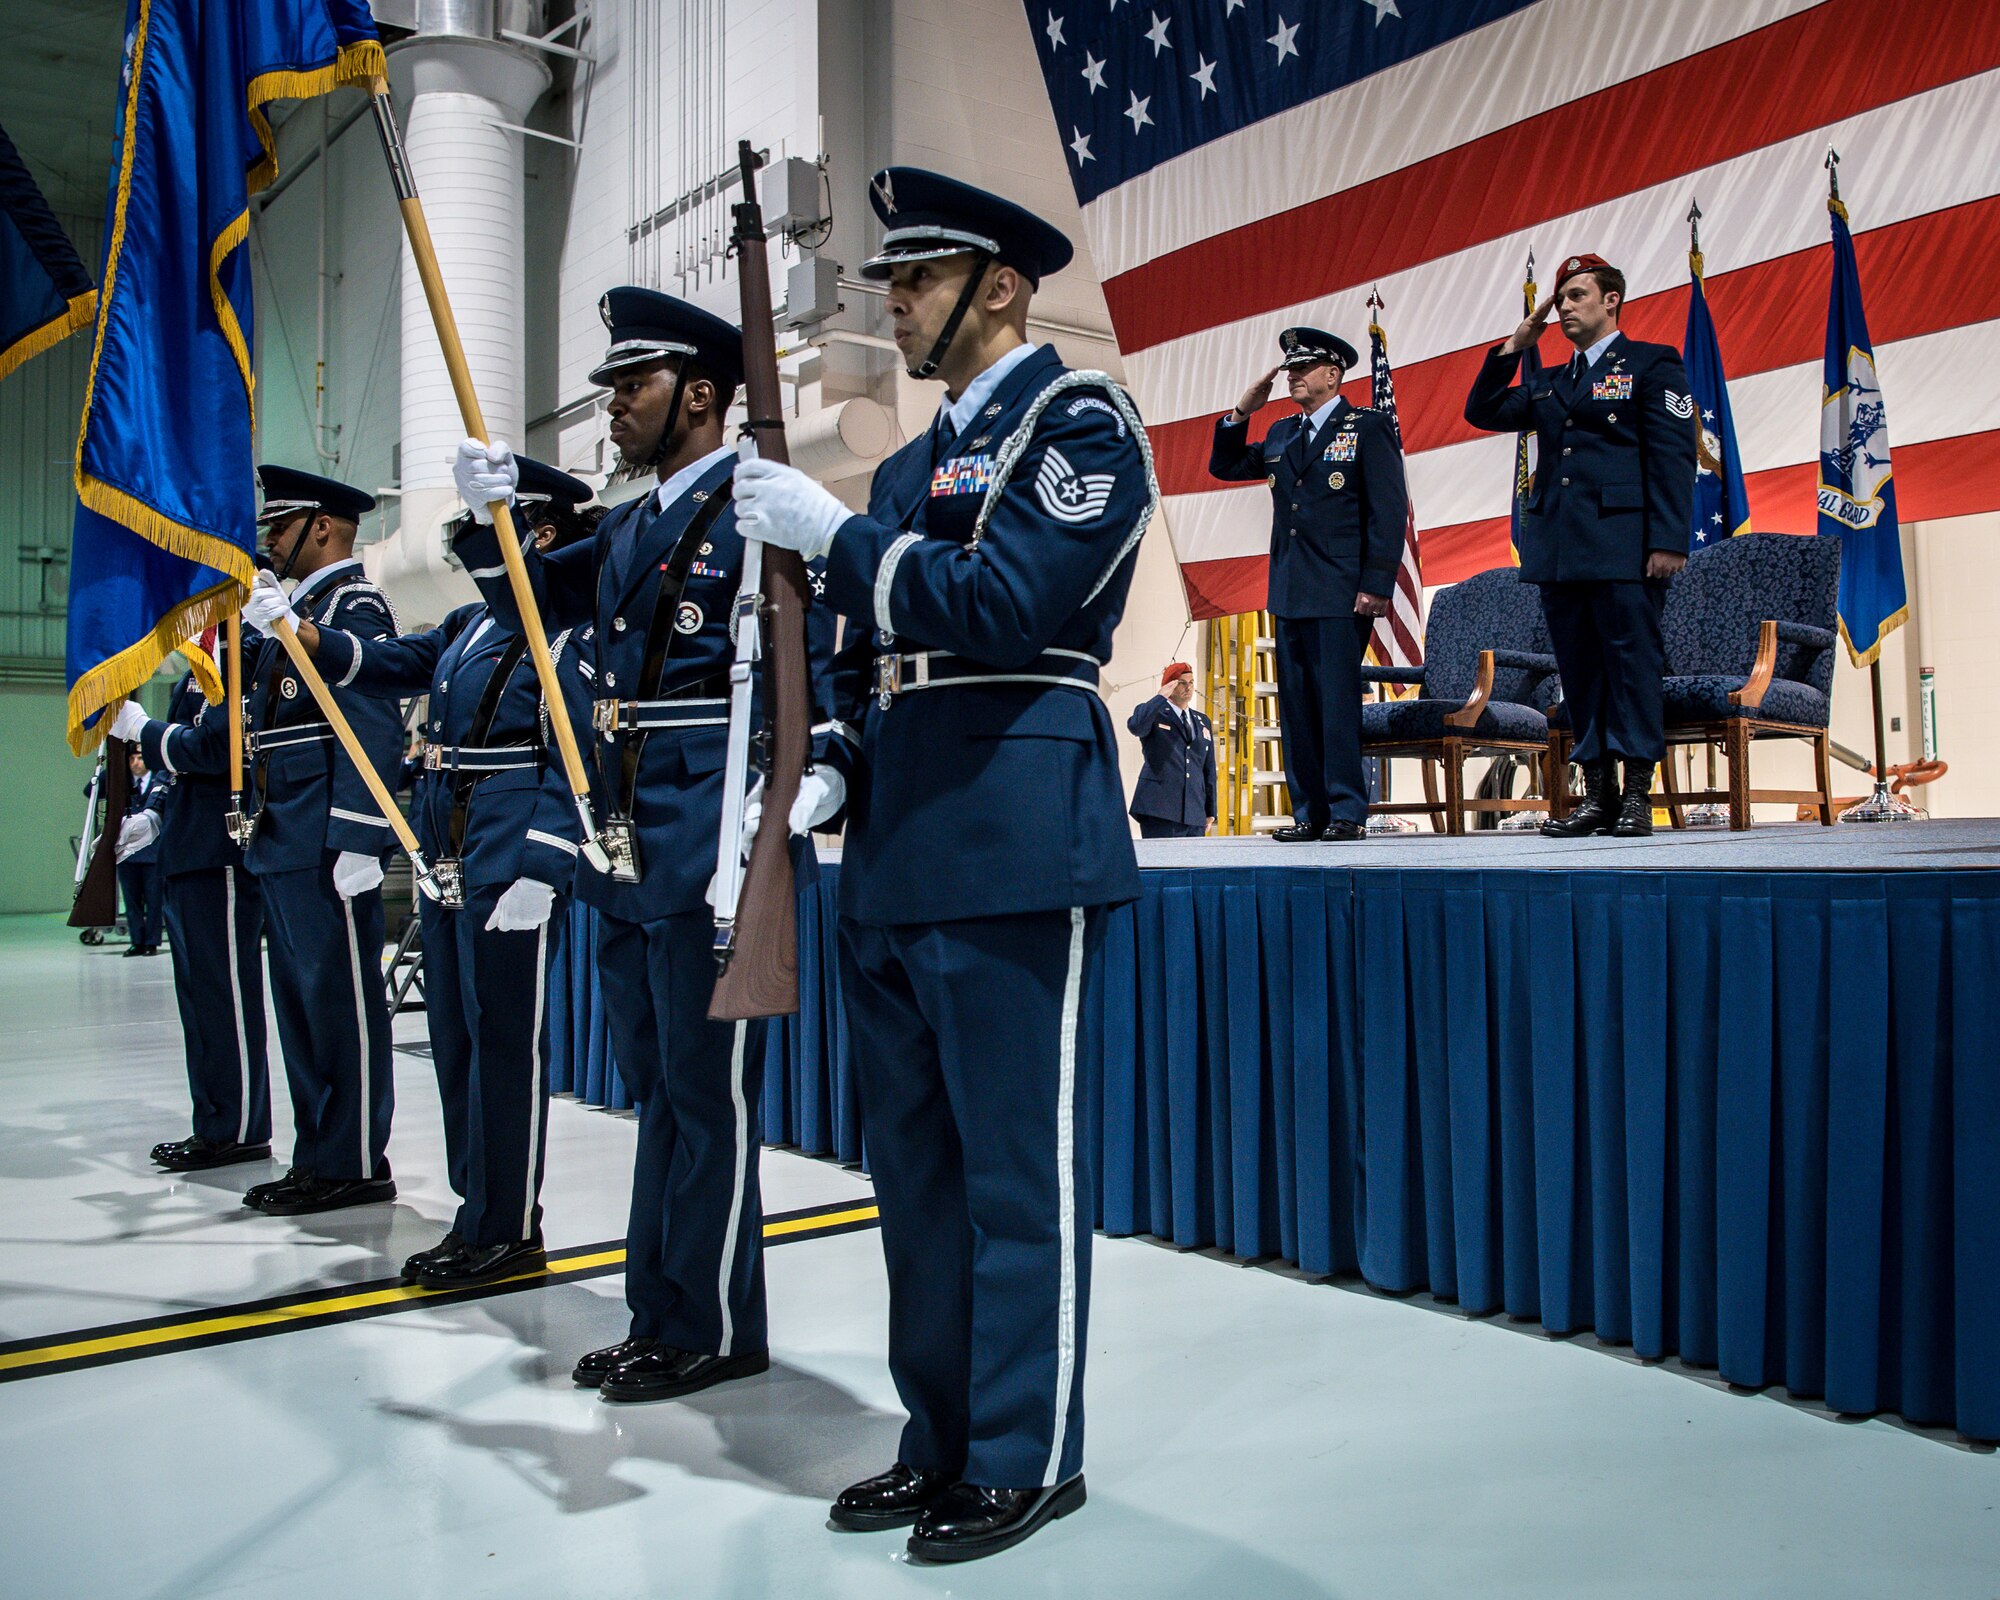 The 123rd Airlift Wing Honor Guard presents the colors during a ceremony at the Kentucky Air National Guard Base in Louisville, Ky, Aug.13, 2019, to bestow the Air Force Cross on Tech. Sgt. Daniel Keller, a combat controller in the 123rd Special Tactics Squadron. Keller earned the award — second only to the Medal of Honor — for valor on the battlefield in Afghanistan. (U.S. Air National Guard photo by Staff Sgt. Joshua Horton)